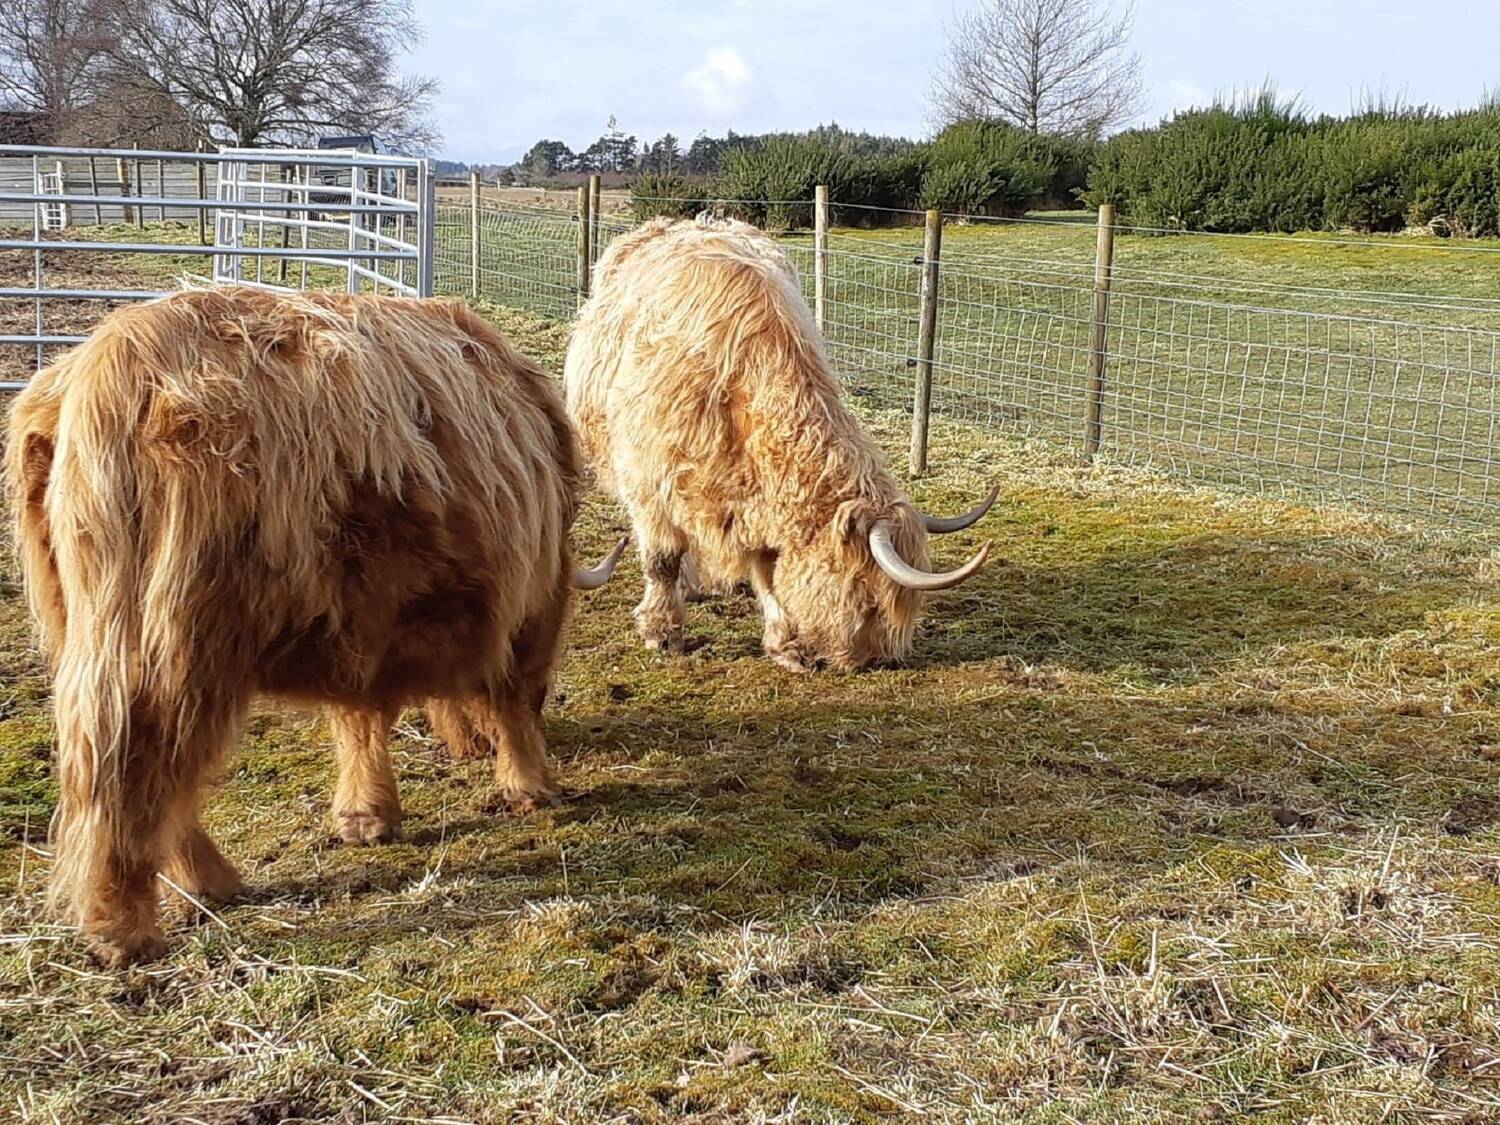 Two Highland cows, with thick shaggy coats, graze in a fenced-off paddock at Culloden.